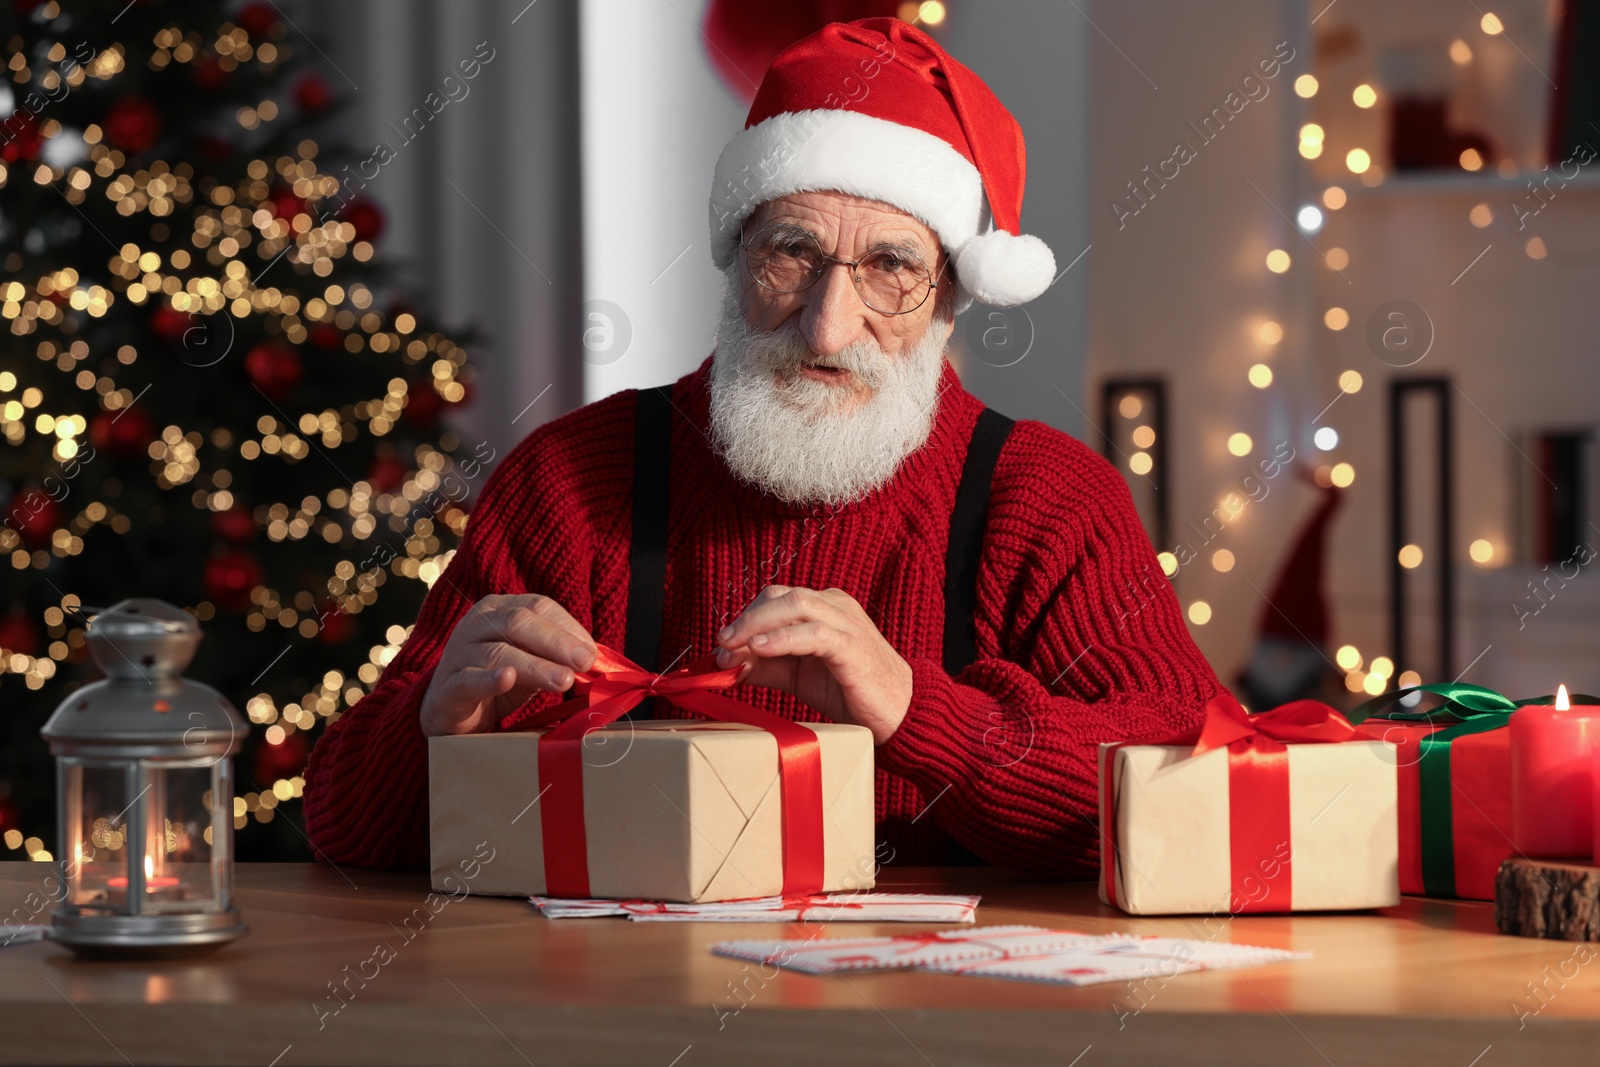 Photo of Santa Claus with Christmas gift at his workplace in decorated room